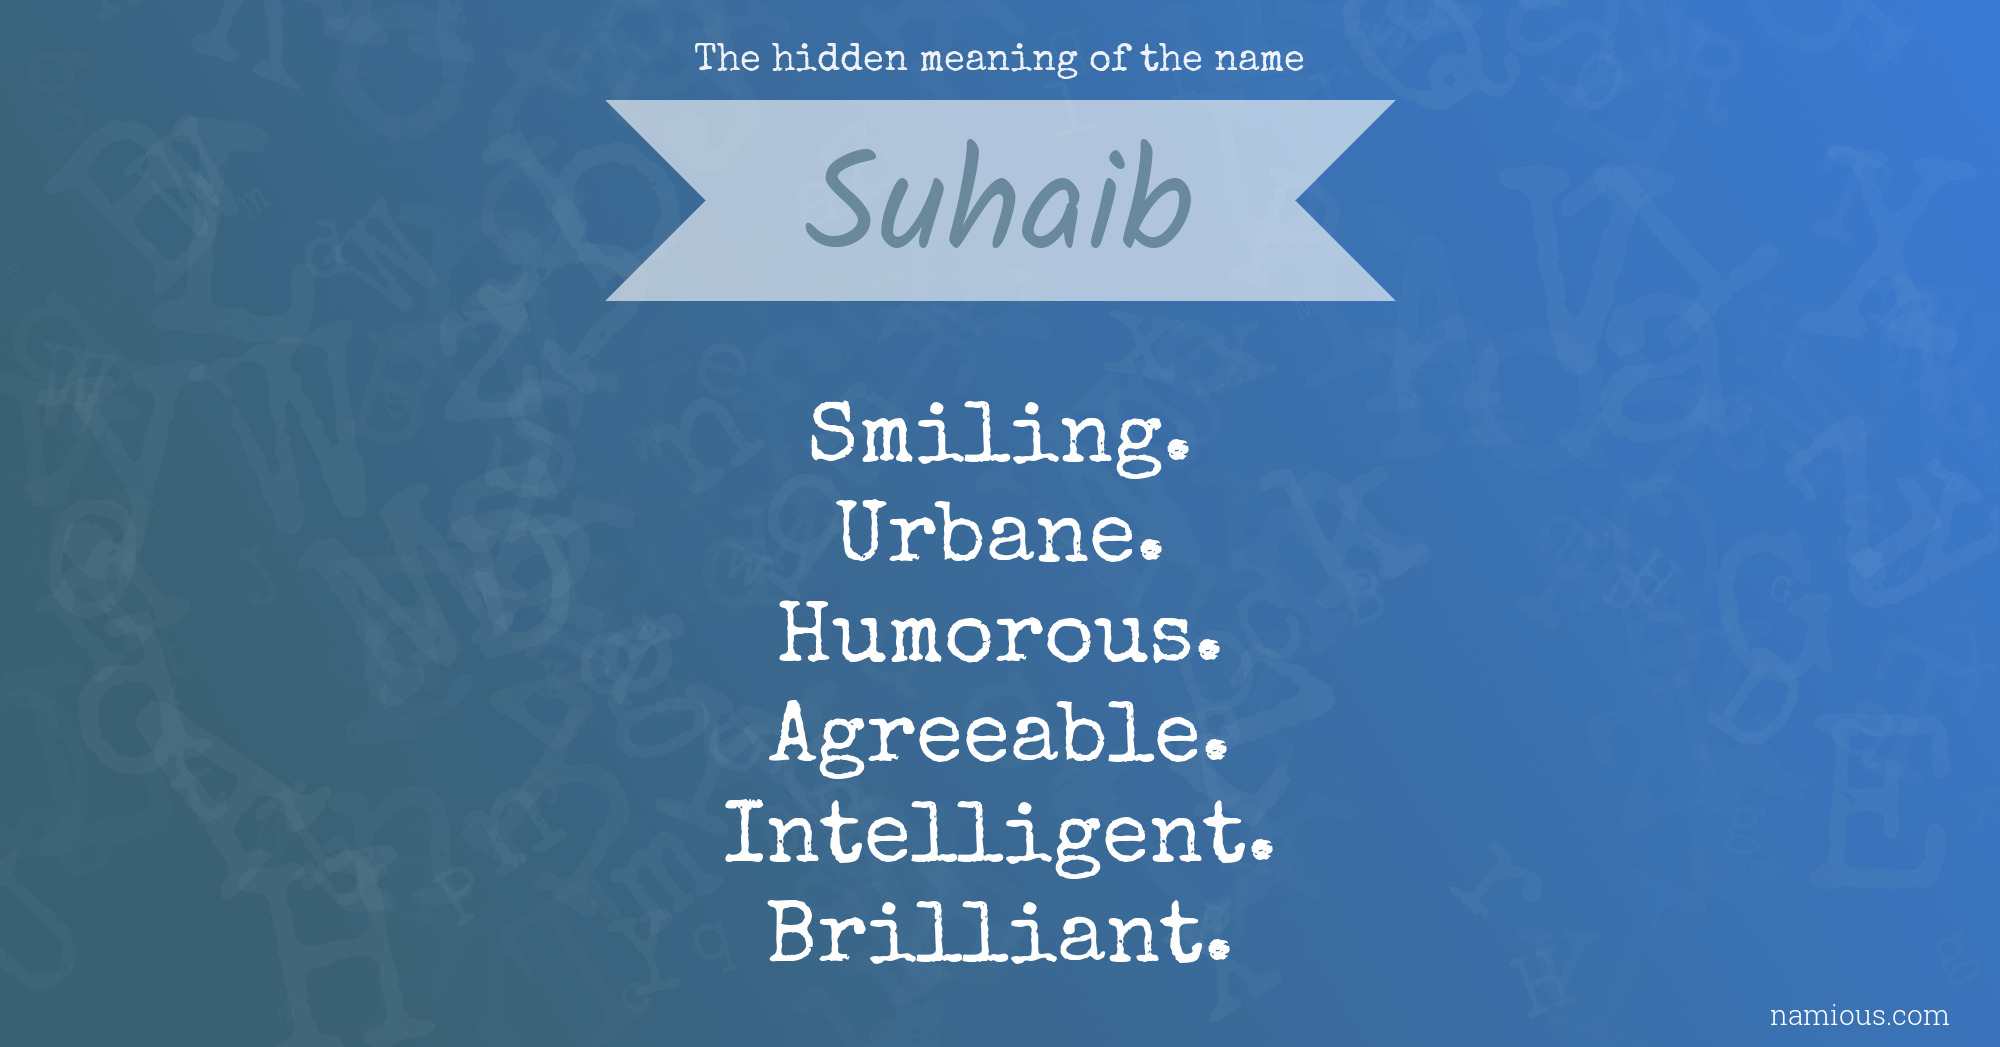 The hidden meaning of the name Suhaib